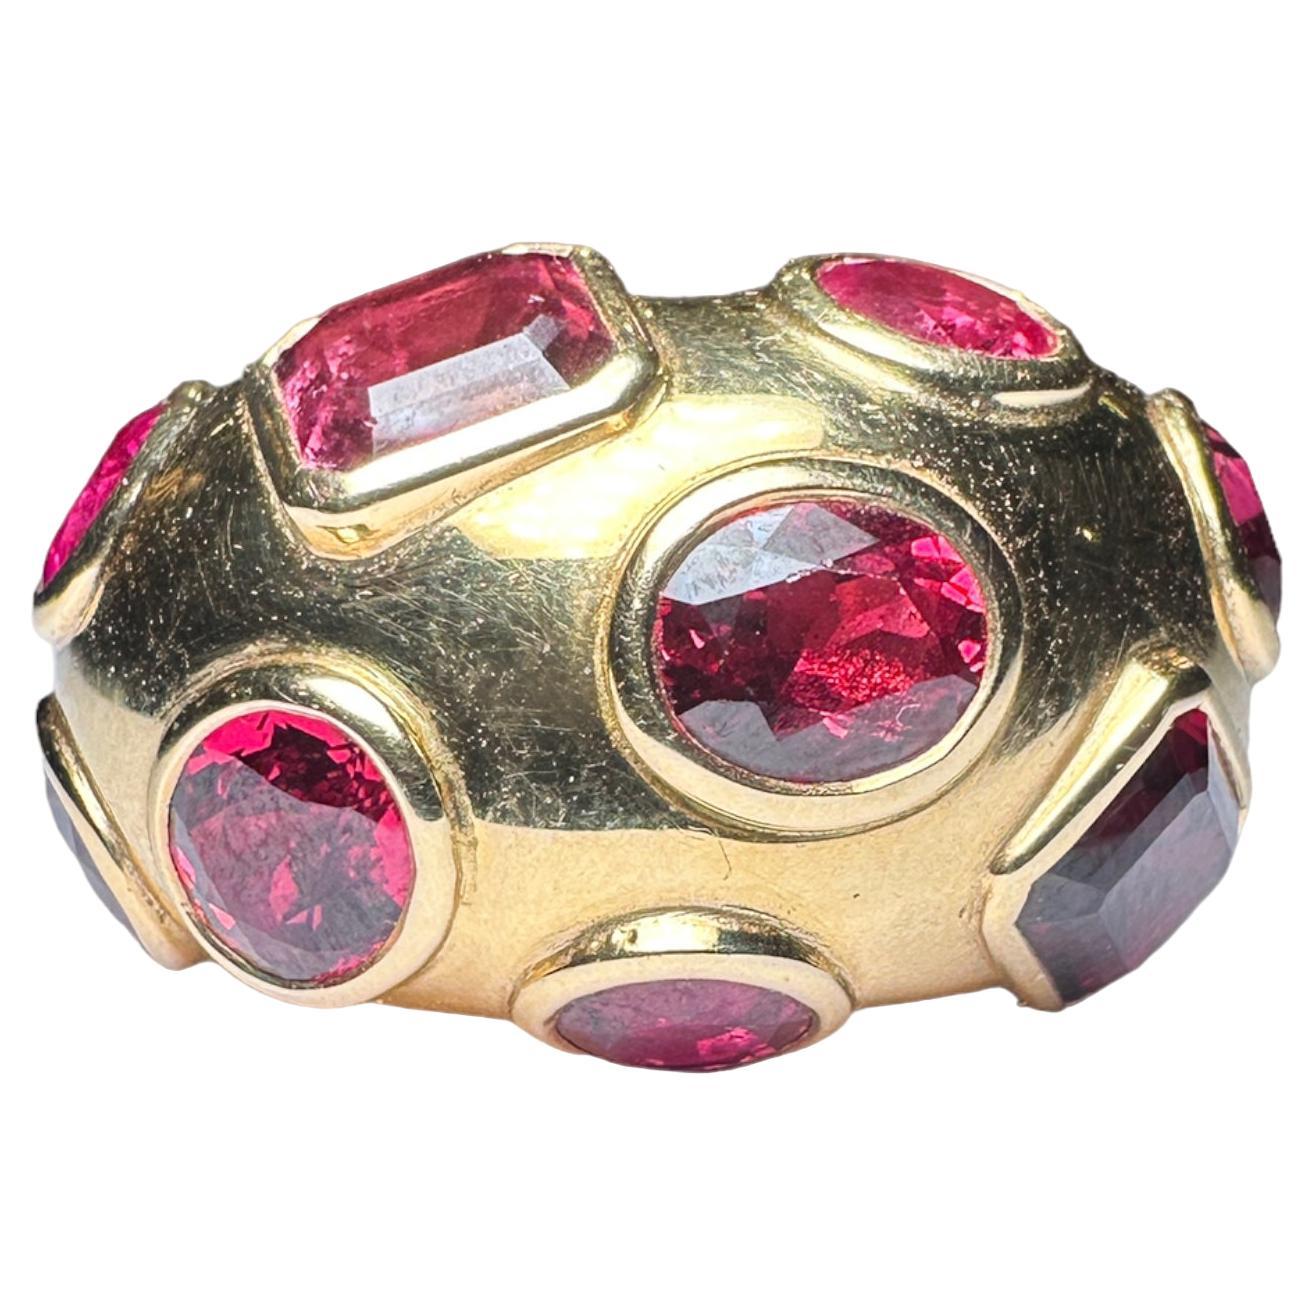 18k Gold Ring with Rubies, Rubellite Tourmalines and Red Spinels For Sale